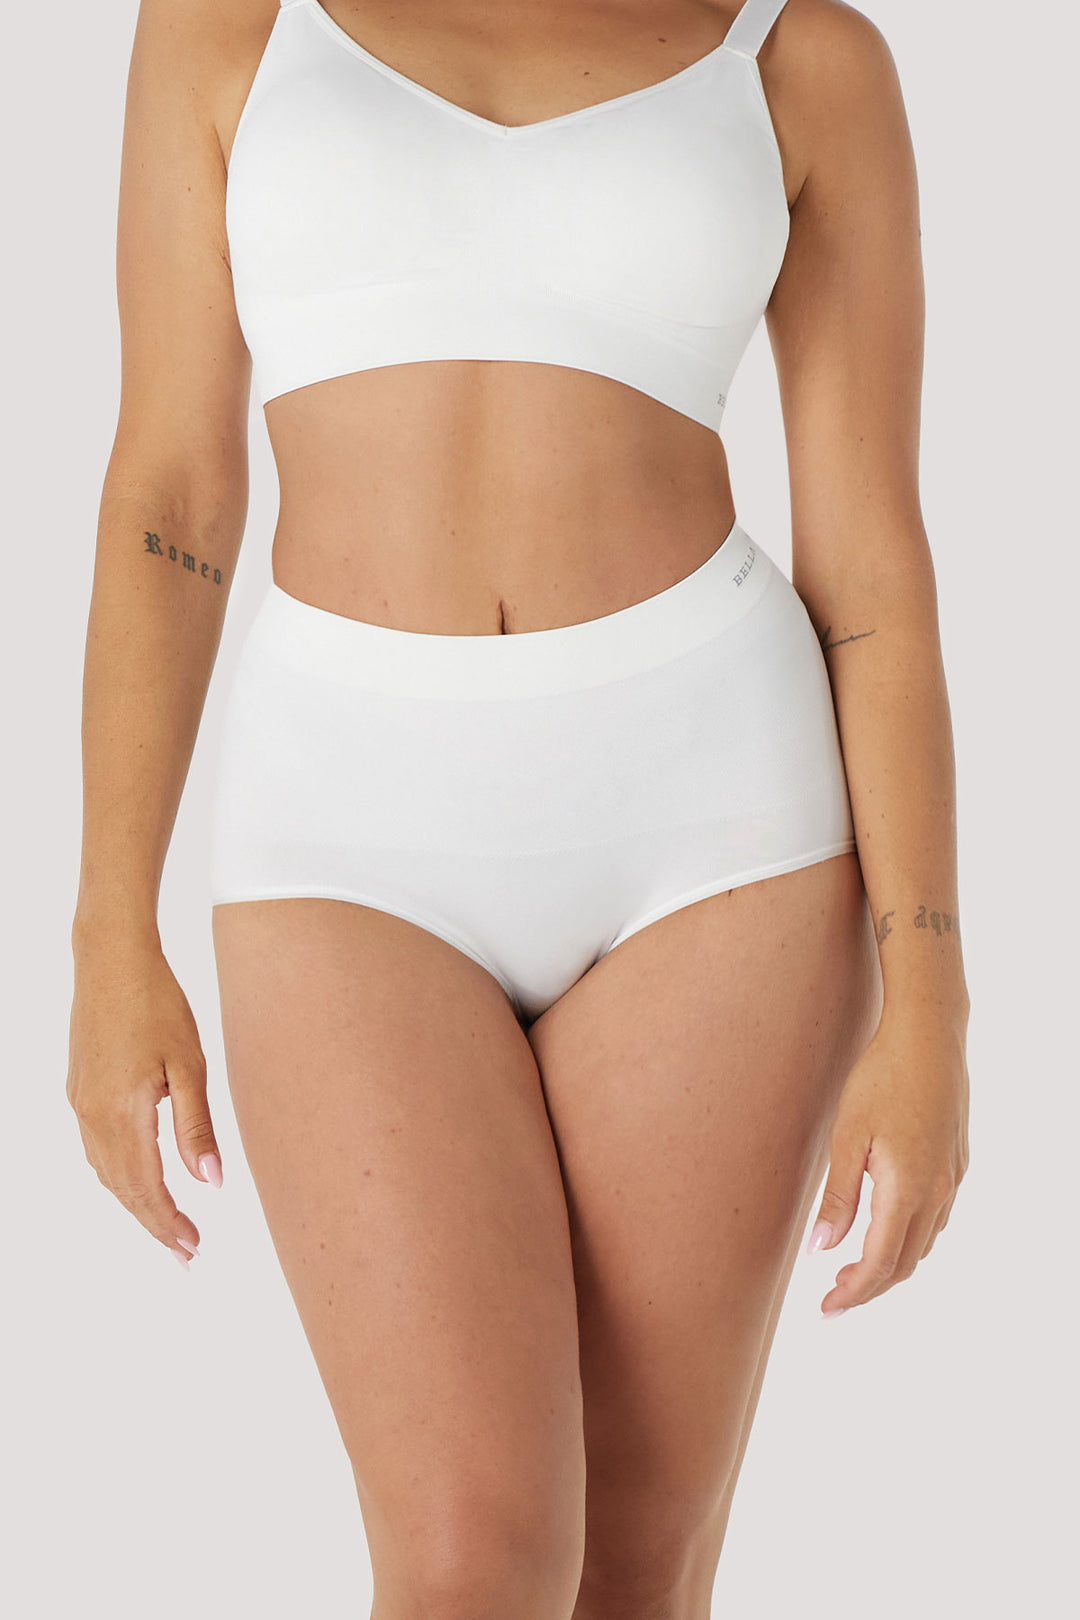 High Waist Smoothing and Firming, Full-Coverage Underwear 2 pack | Bella Bodies UK | White | Front